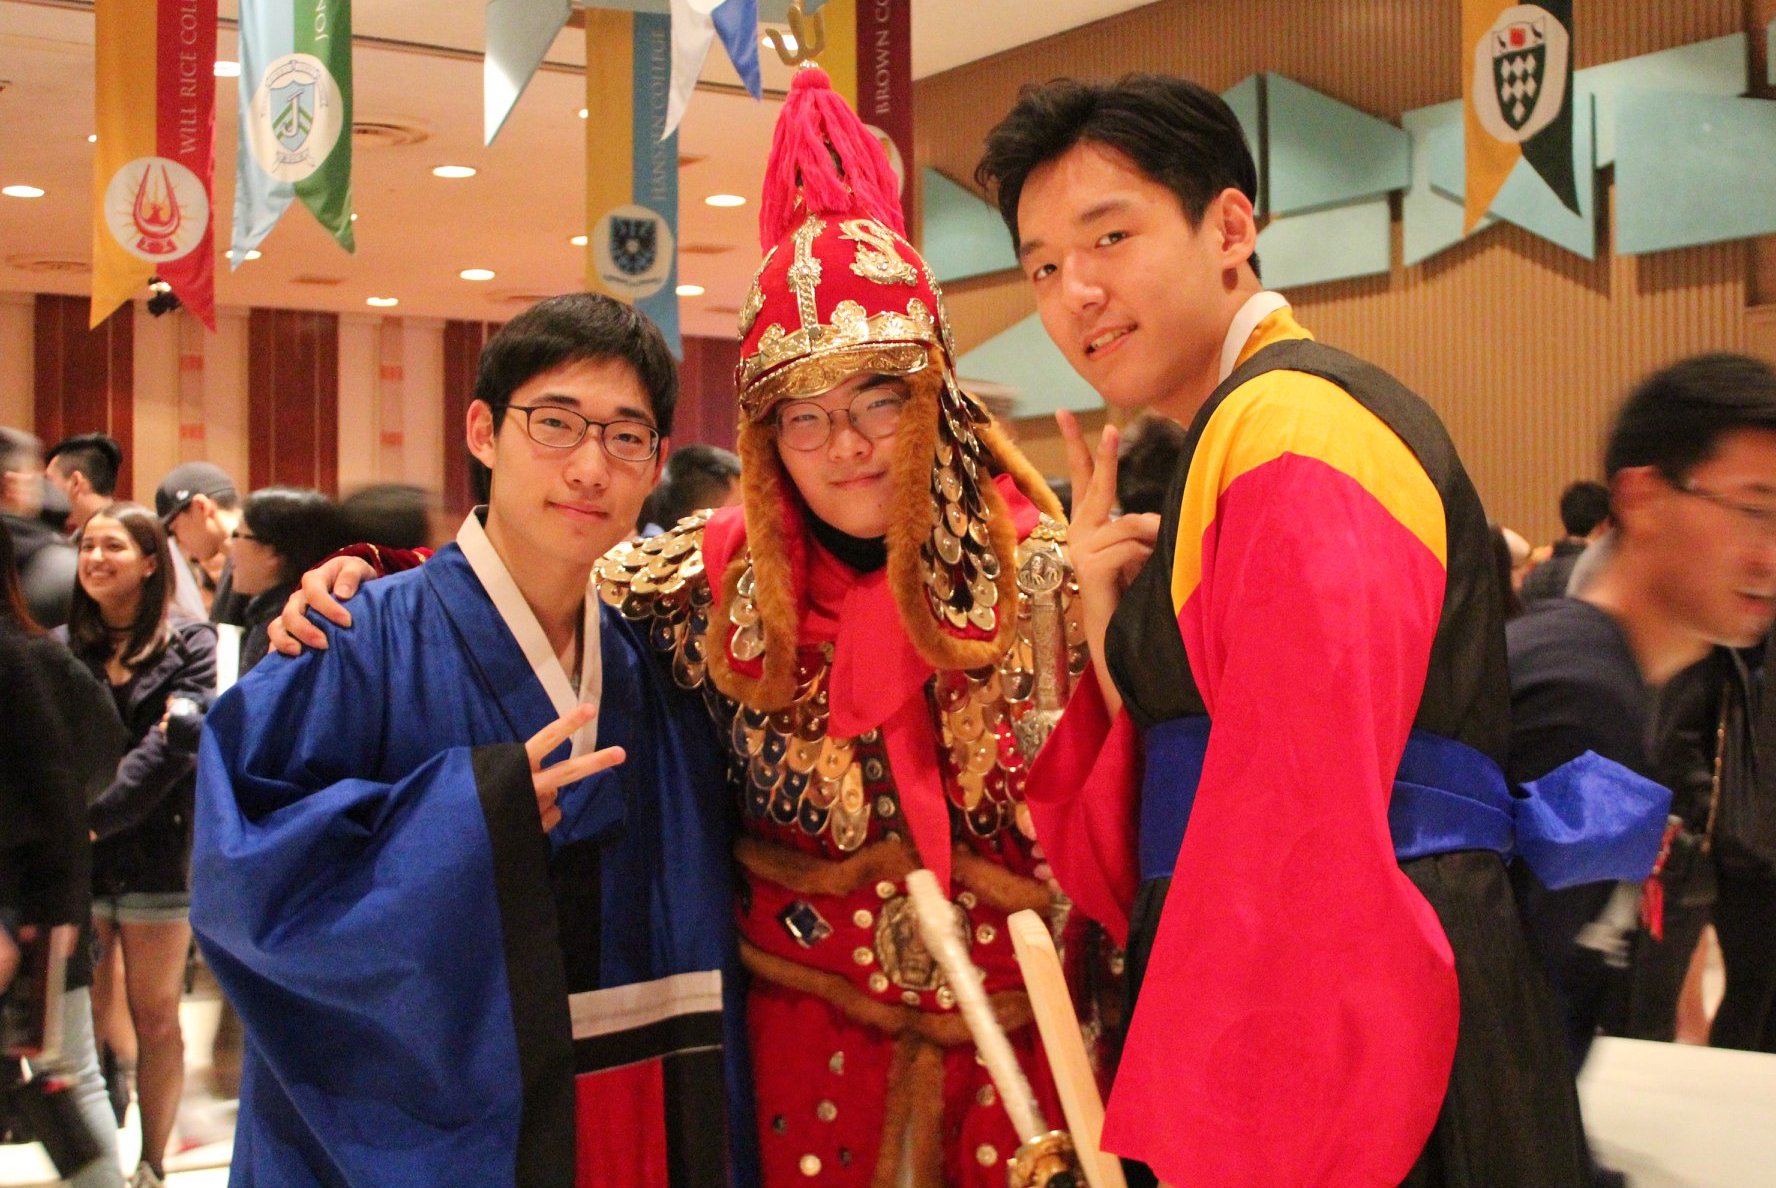 Three students dressed in different types of traditional Korean outfits.